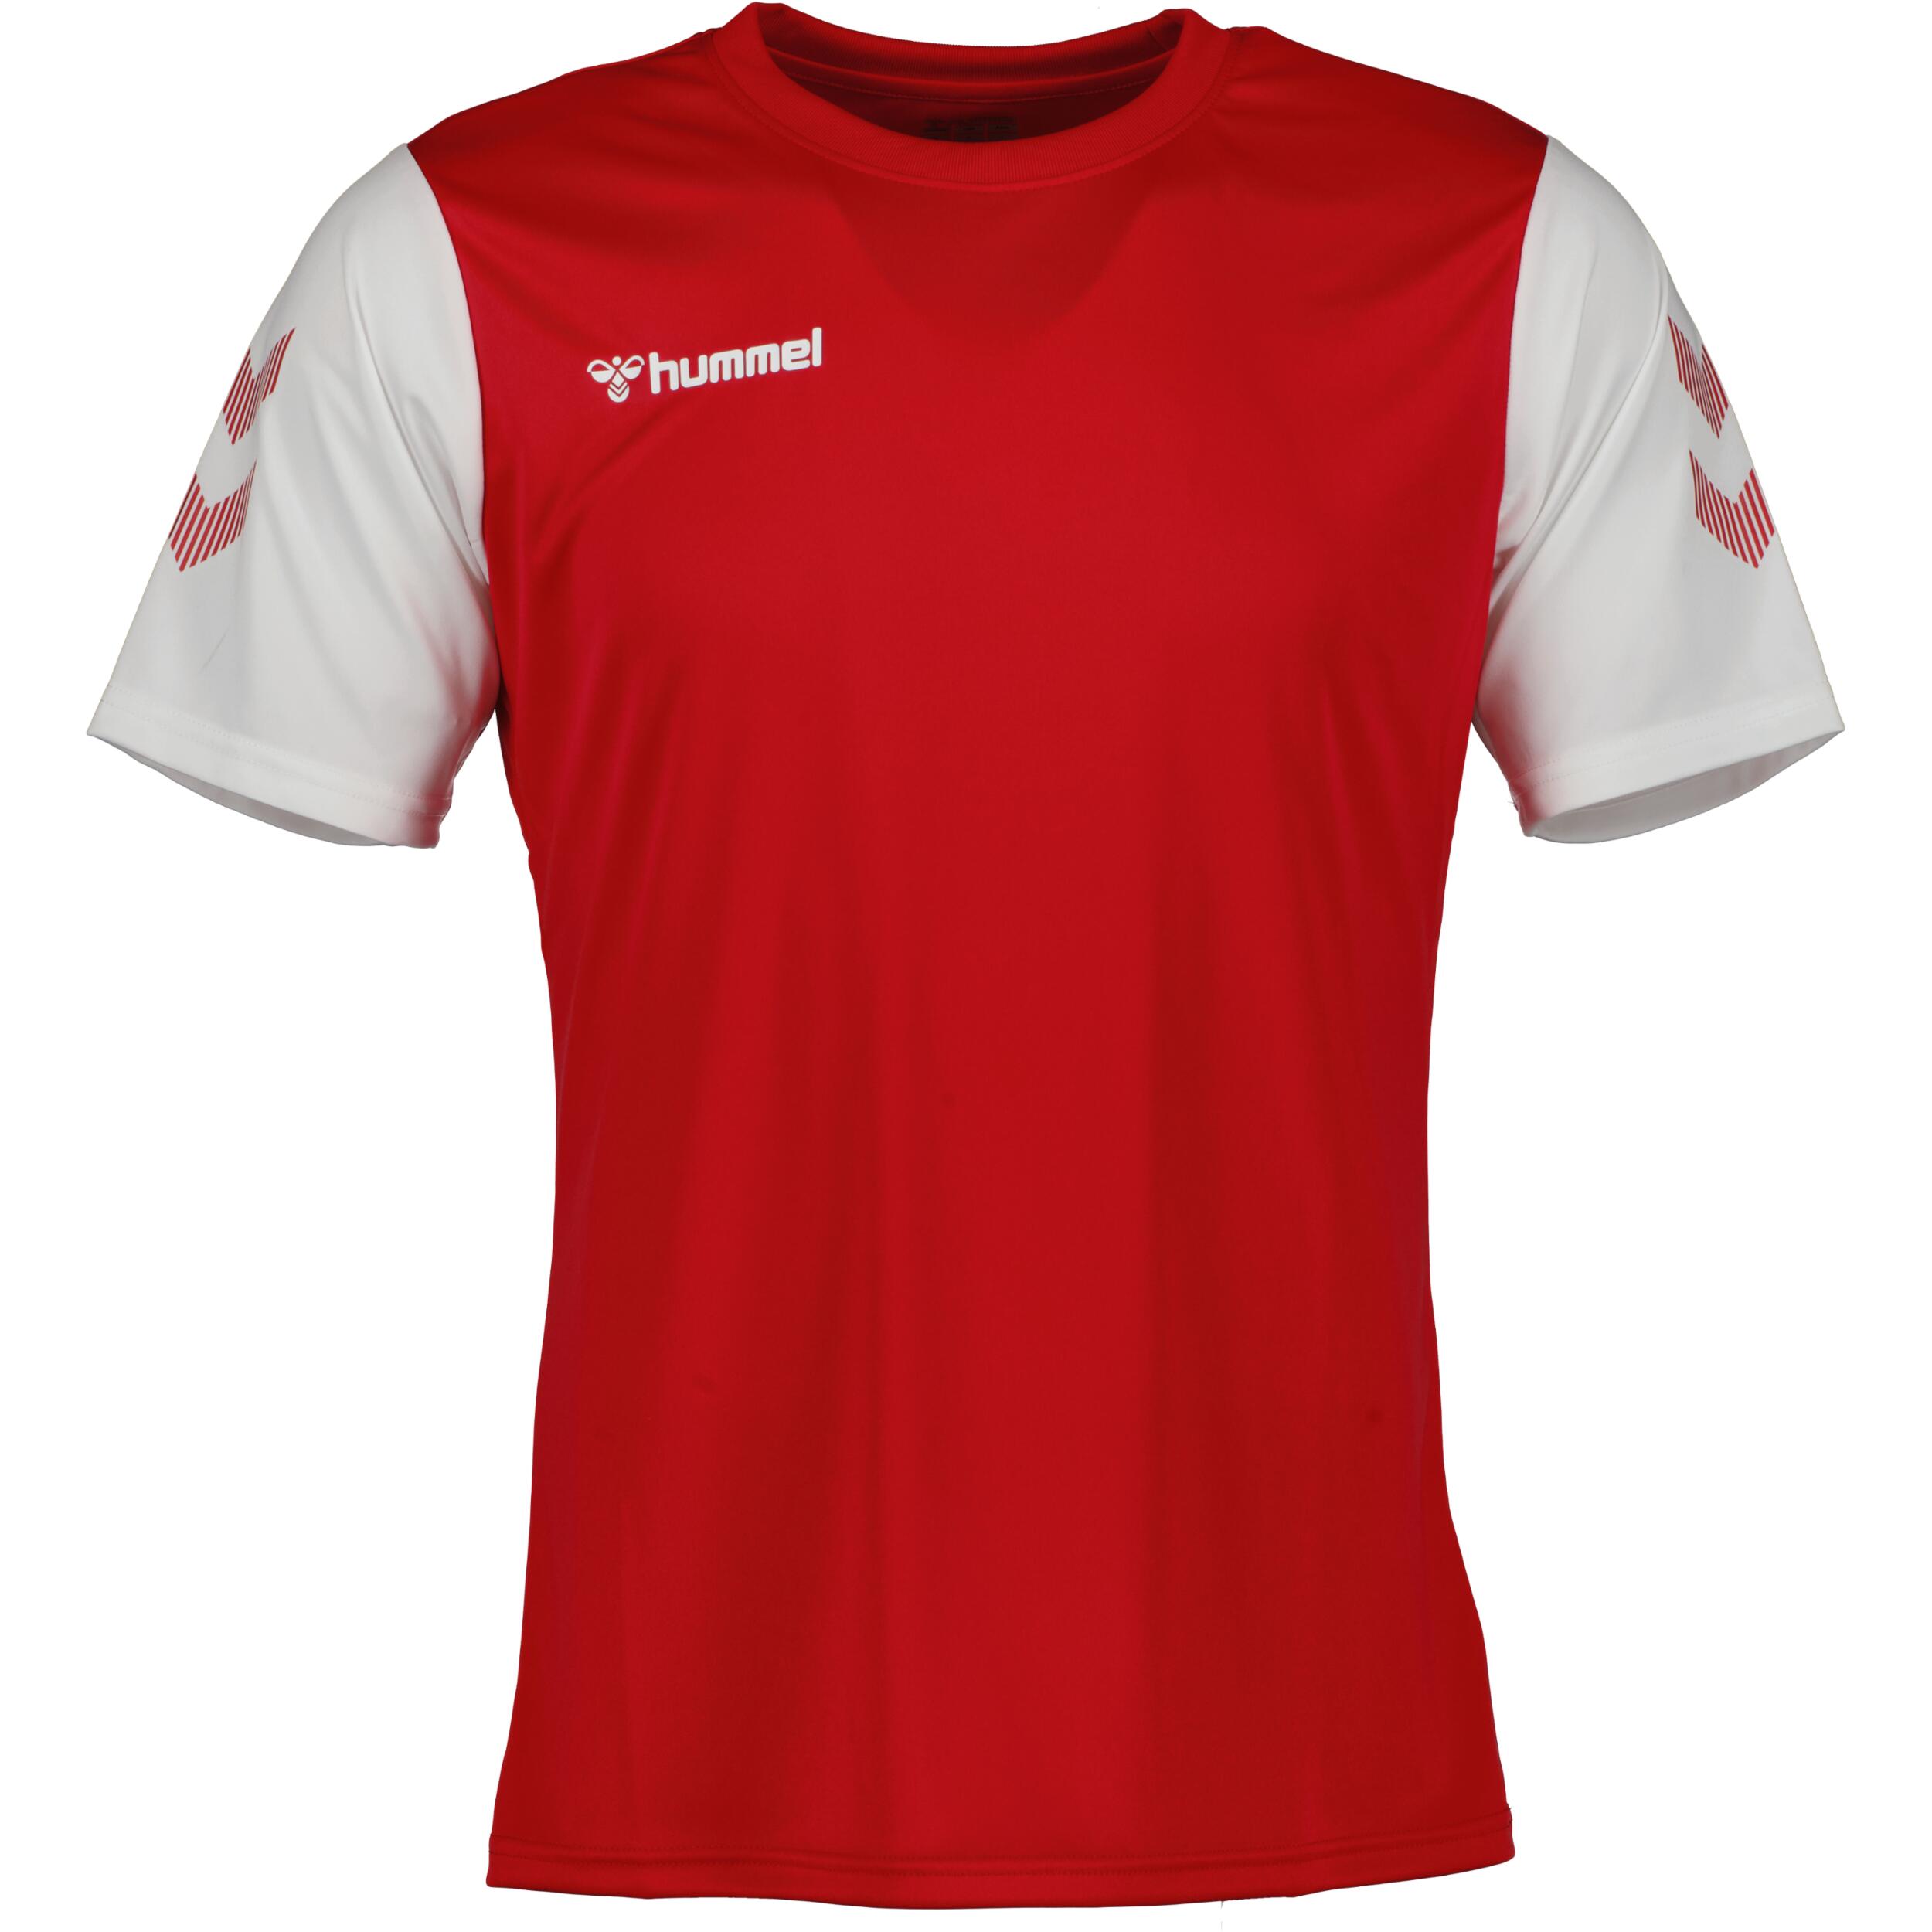 Match jersey for kids, great for football, in red/white 1/3